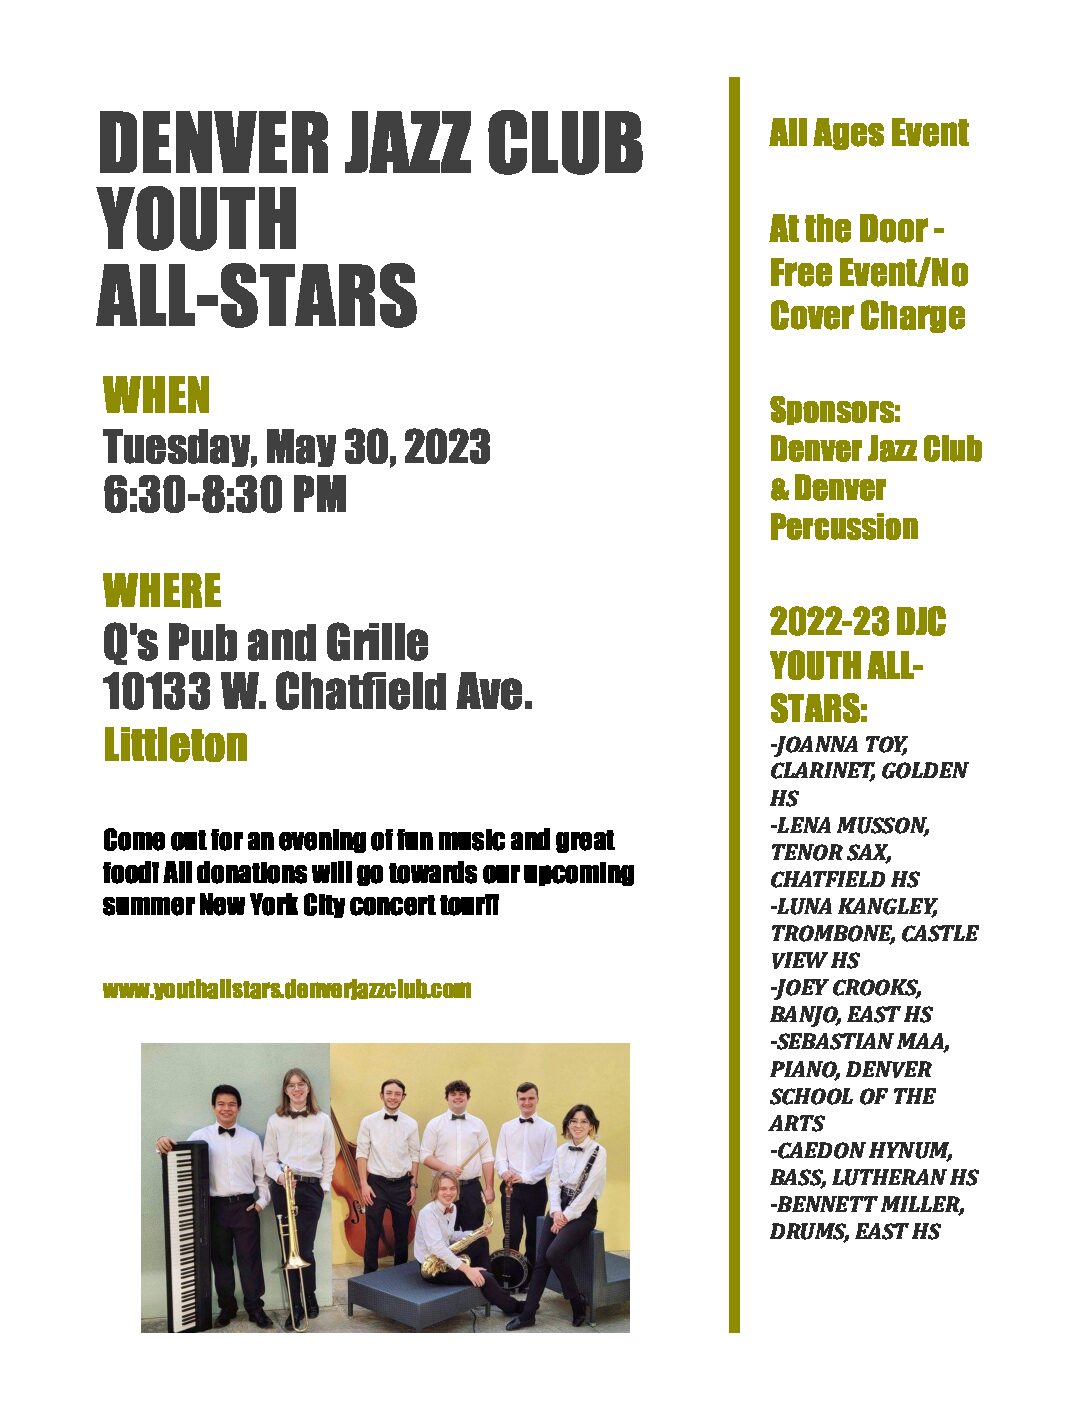 Denver Jazz Club Youth All-Stars to be Featured at Q’s Pub & Grille on Tuesday, May 30th (6:30-8:30pm)